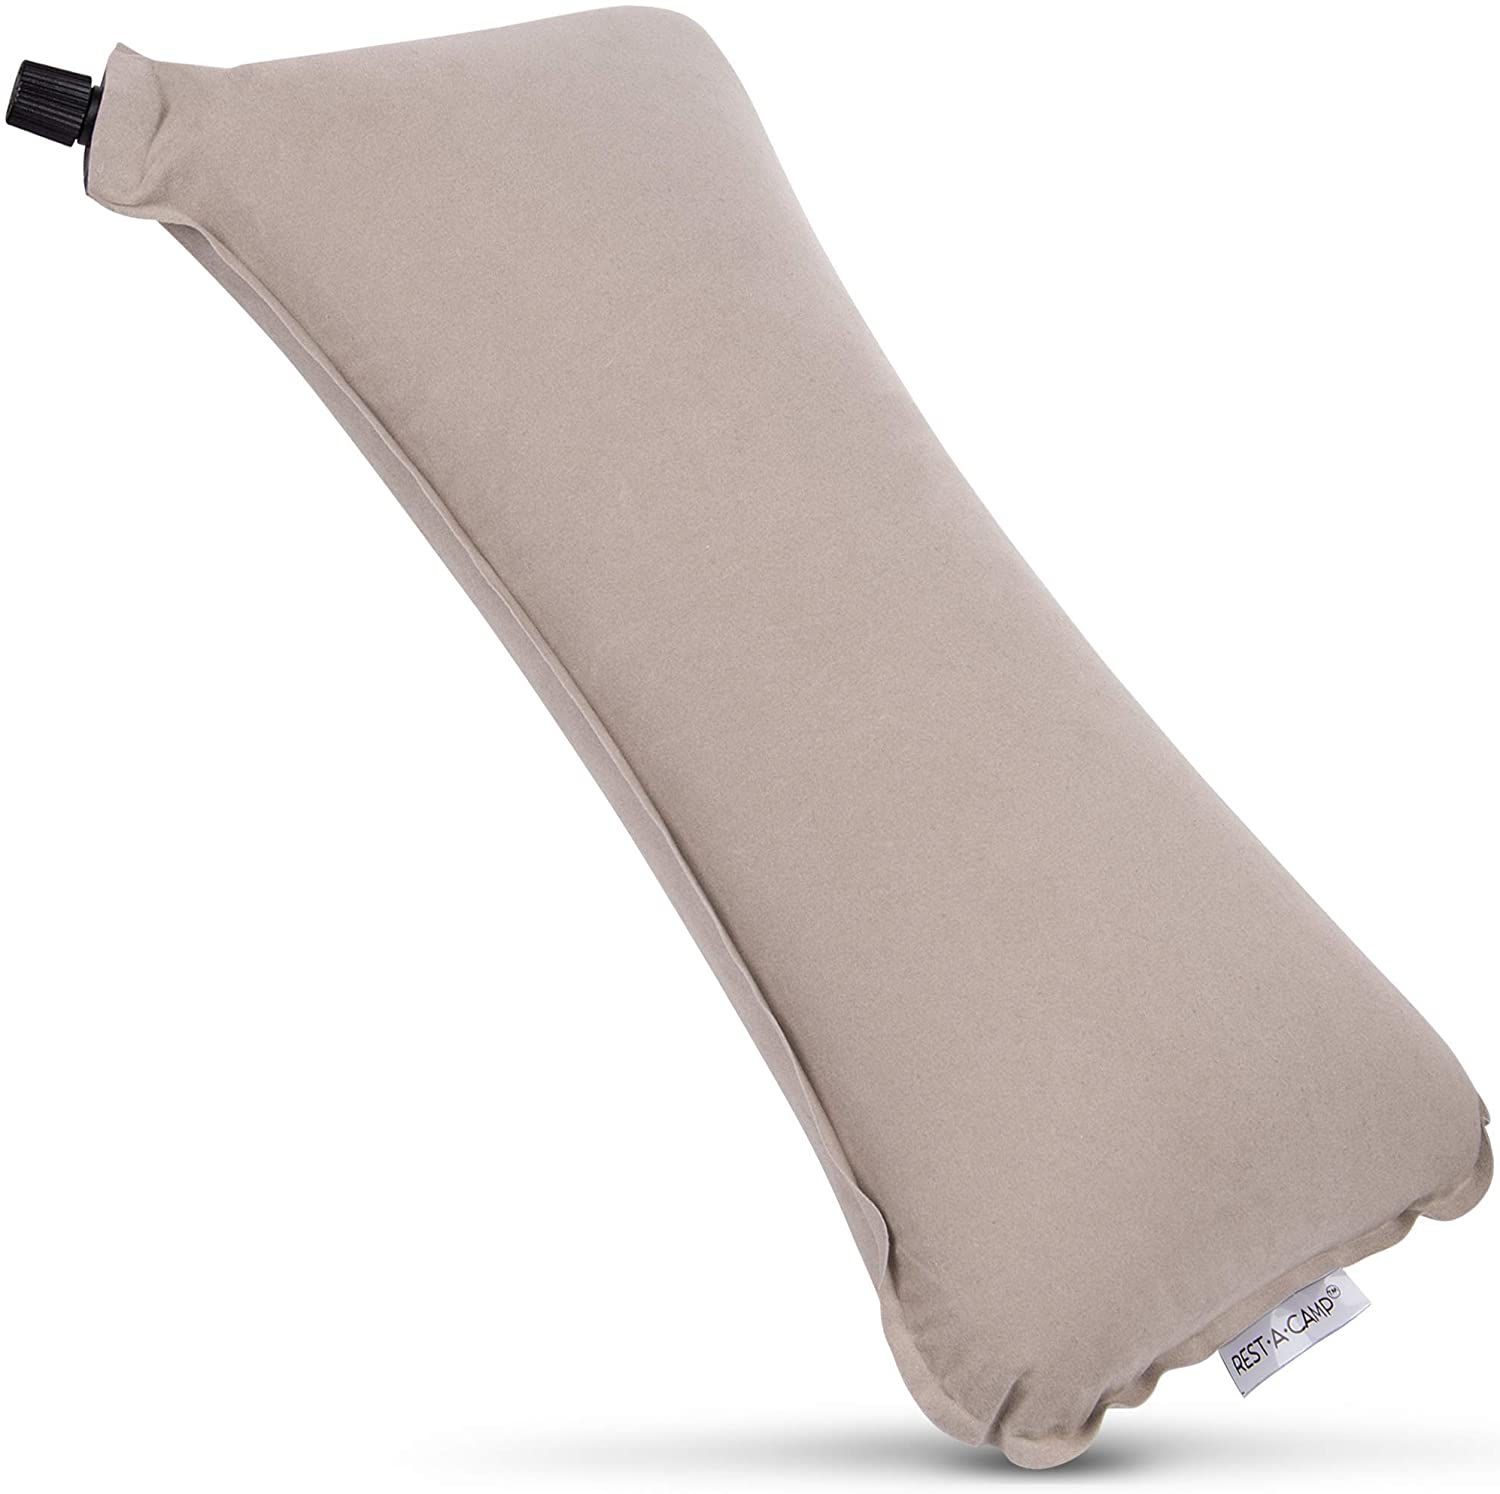 Rest-A-Camp Inflatable Ultralight Backpacking Pillow